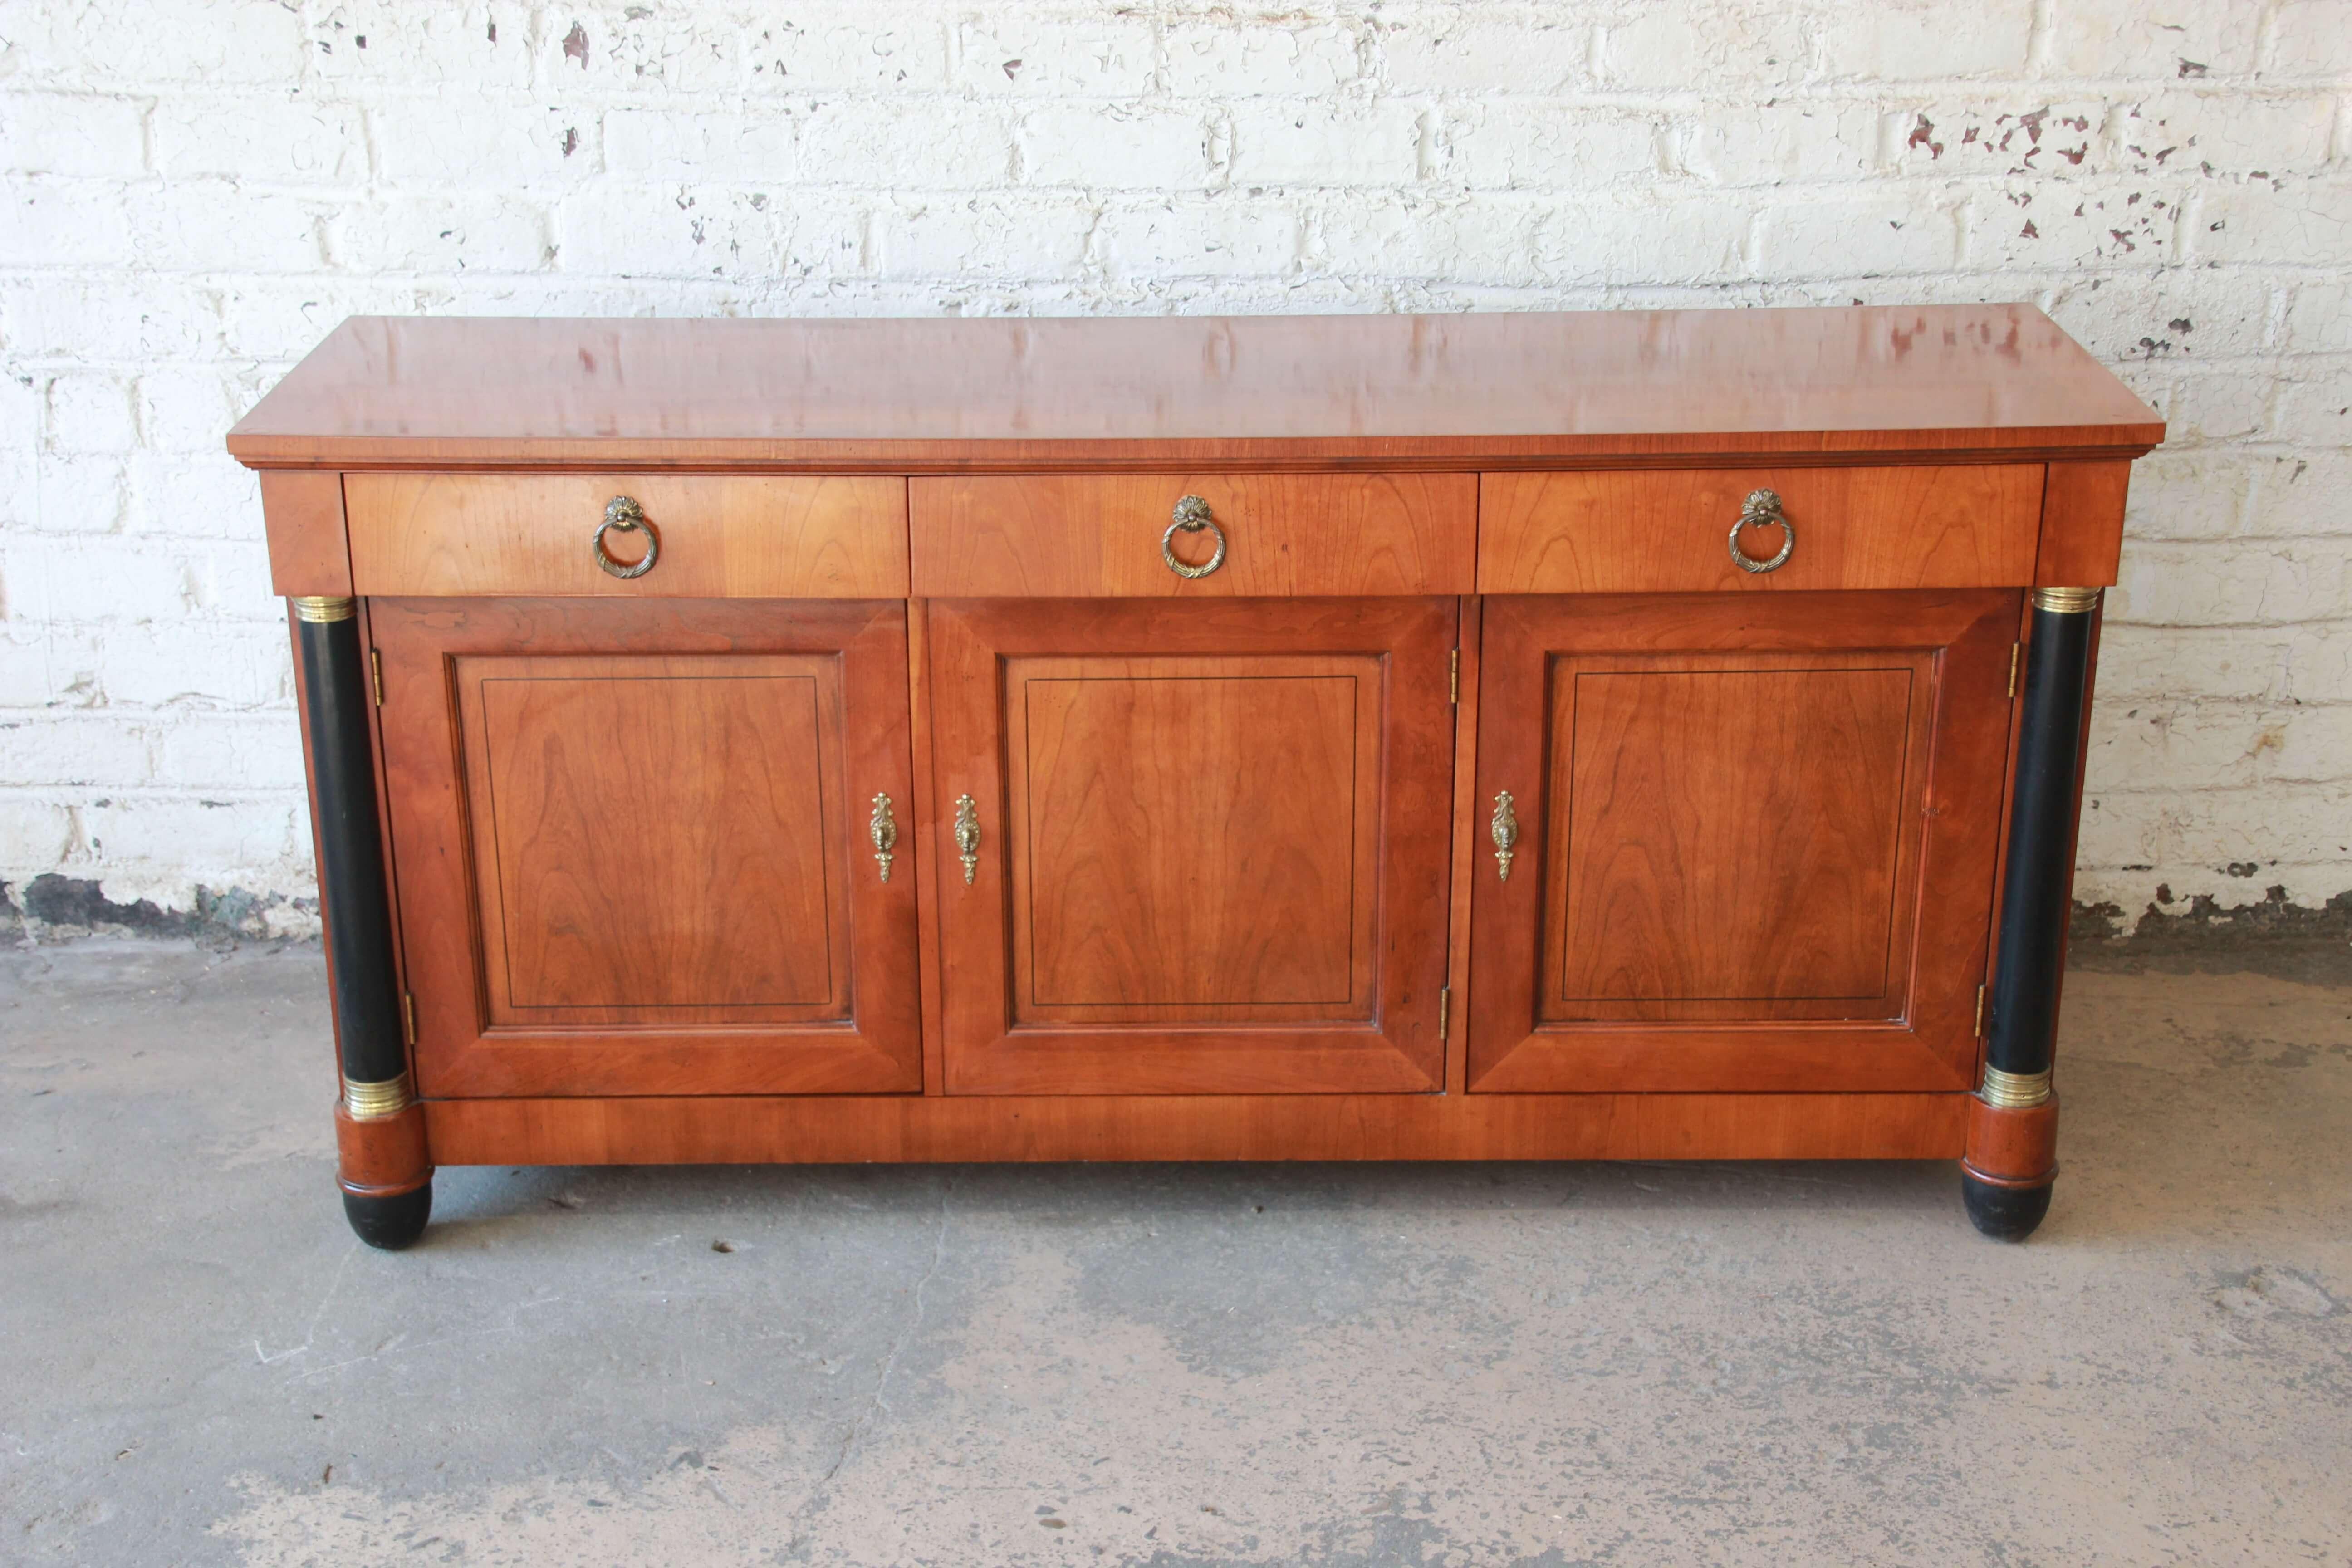 Offering a beautiful neoclassical cheerywood sideboard credenza by Baker Furniture. The piece has nice cheerywood grain with brass round pull on the top three drawers that open and close smoothly. The two cabinet doors on the left open up to a large